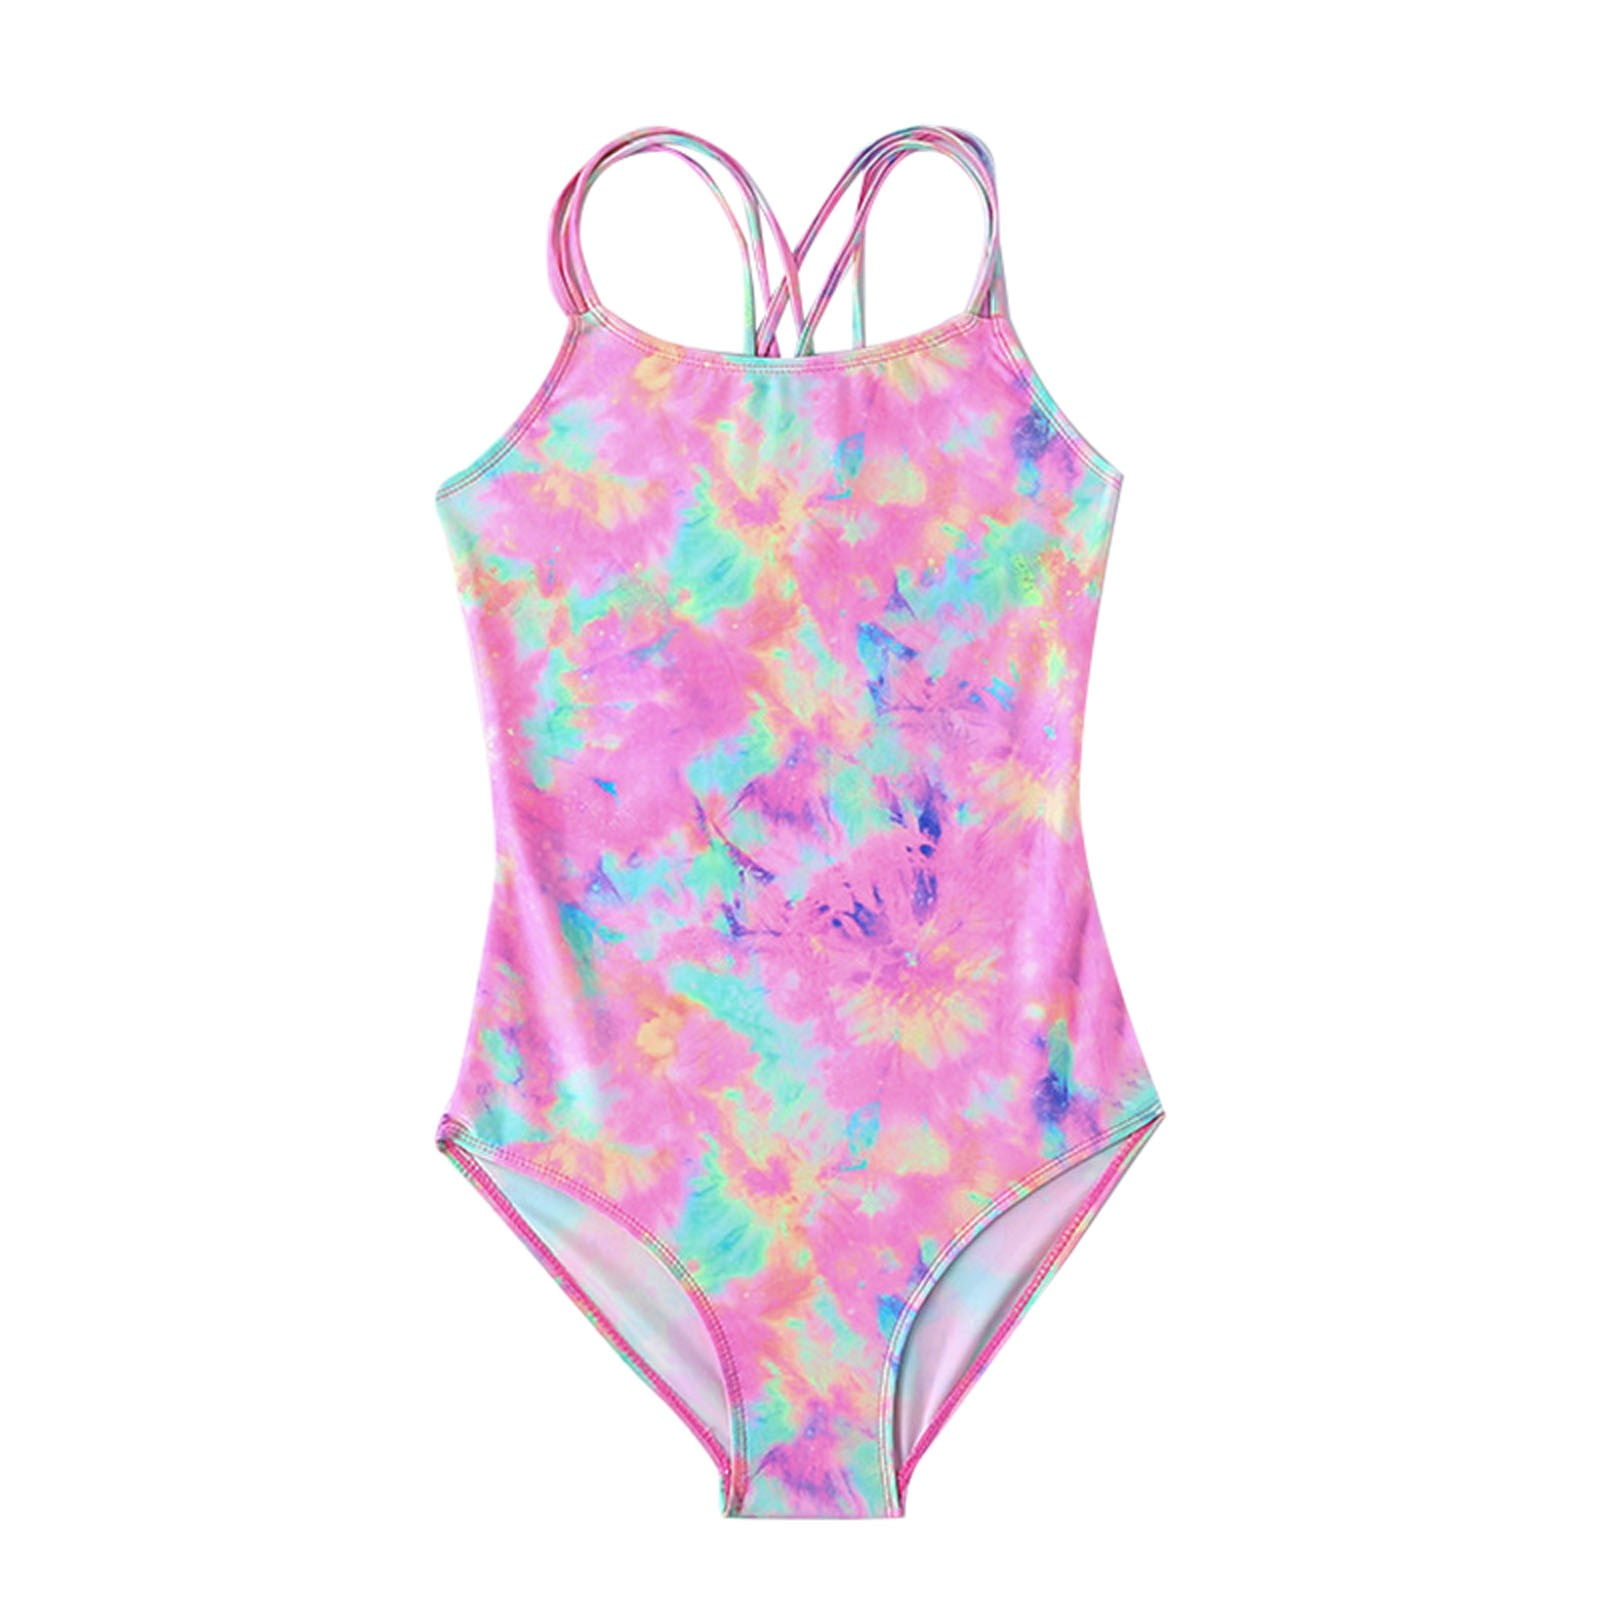 Big Kids Summer Swimsuit Children's Swimsuit All Color Tie Dye Style ...